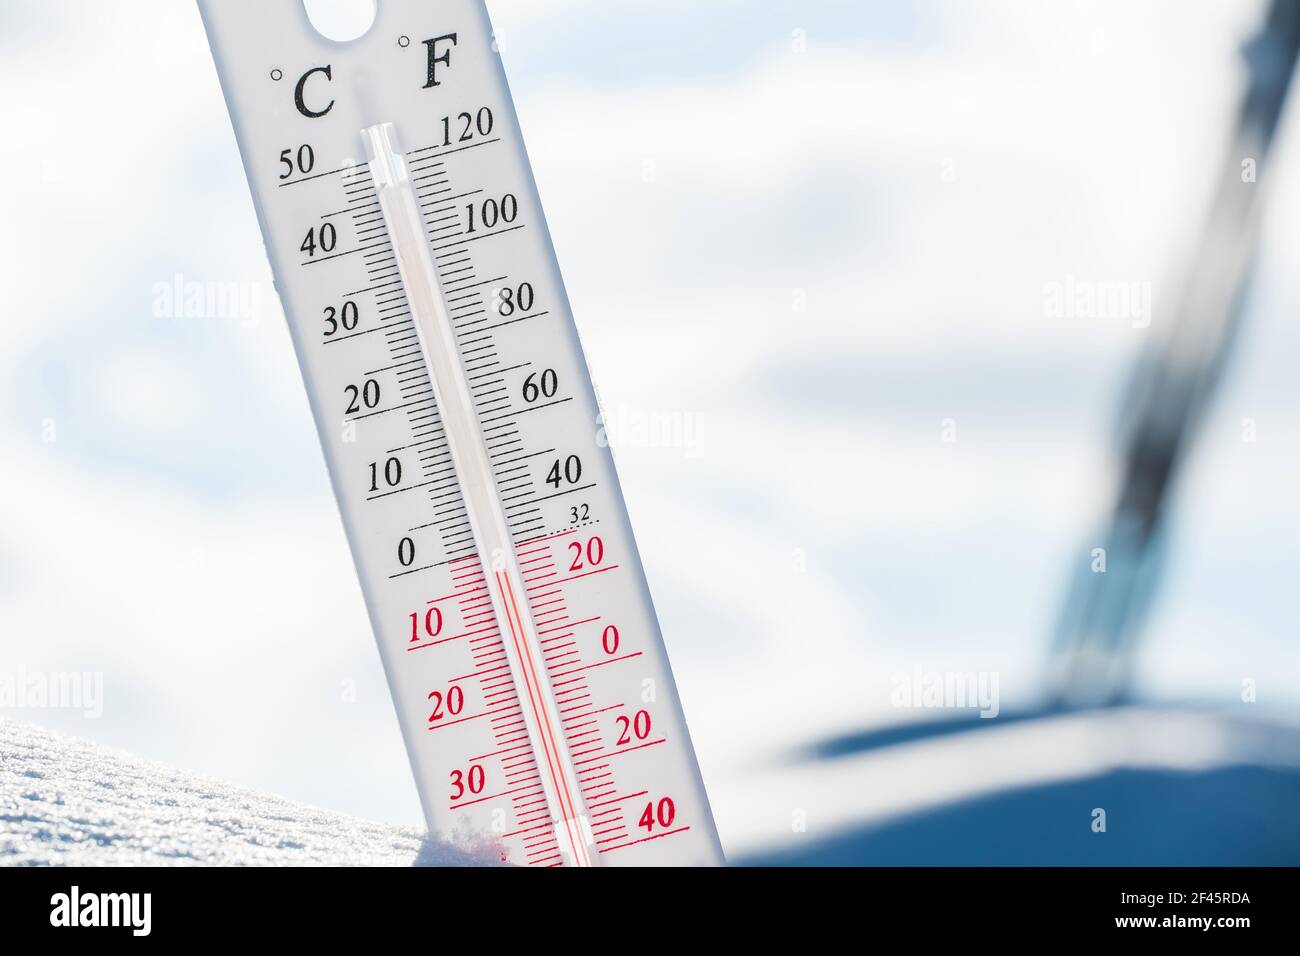 https://c8.alamy.com/comp/2F45RDA/the-thermometer-lies-on-the-snow-and-shows-a-negative-temperature-in-cold-weather-on-the-blue-skymeteorological-conditions-with-low-air-and-ambient-t-2F45RDA.jpg